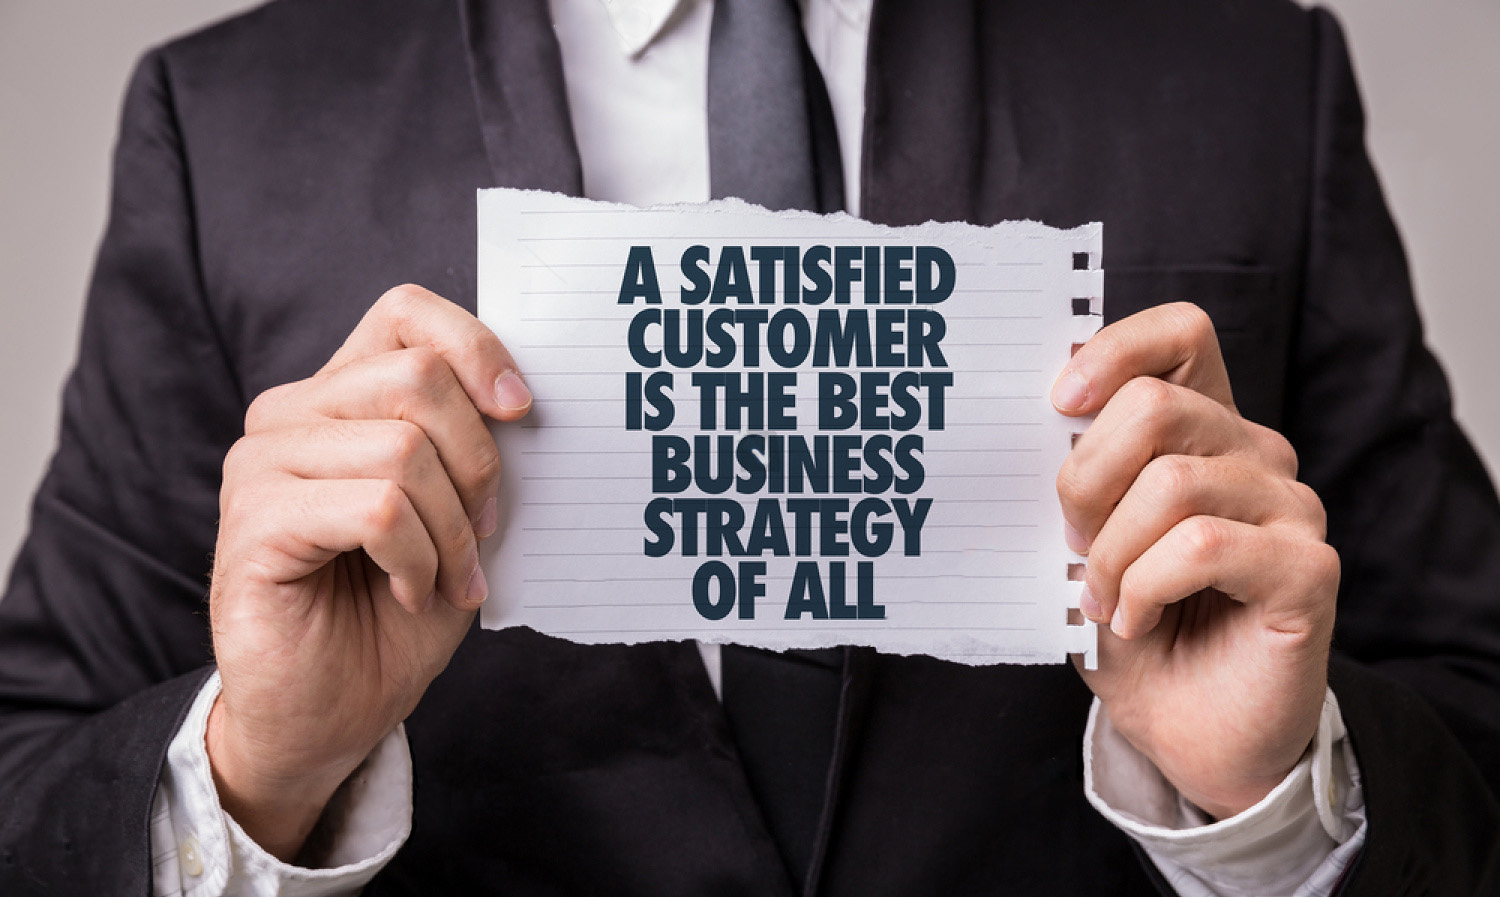 Man holding a sign that says 'A SATISIFIED CUSTOMER IS THE BEST BUSINESS STRATEGY OF ALL'